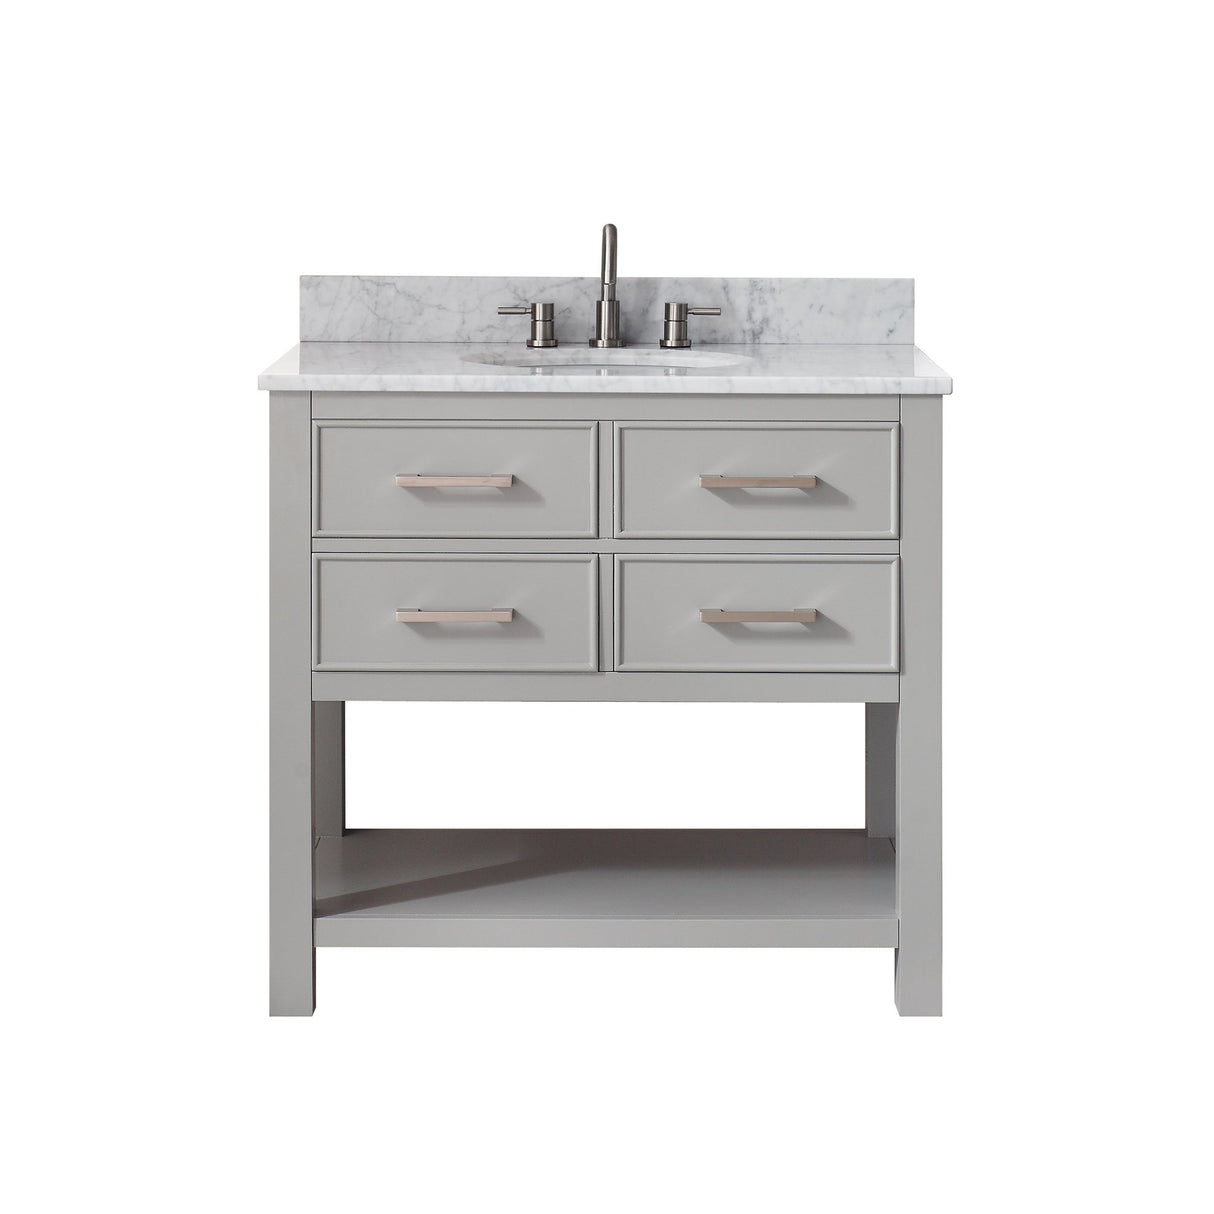 Avanity Brooks 37 in. Vanity in Chilled Gray finish with Carrara White Marble Top